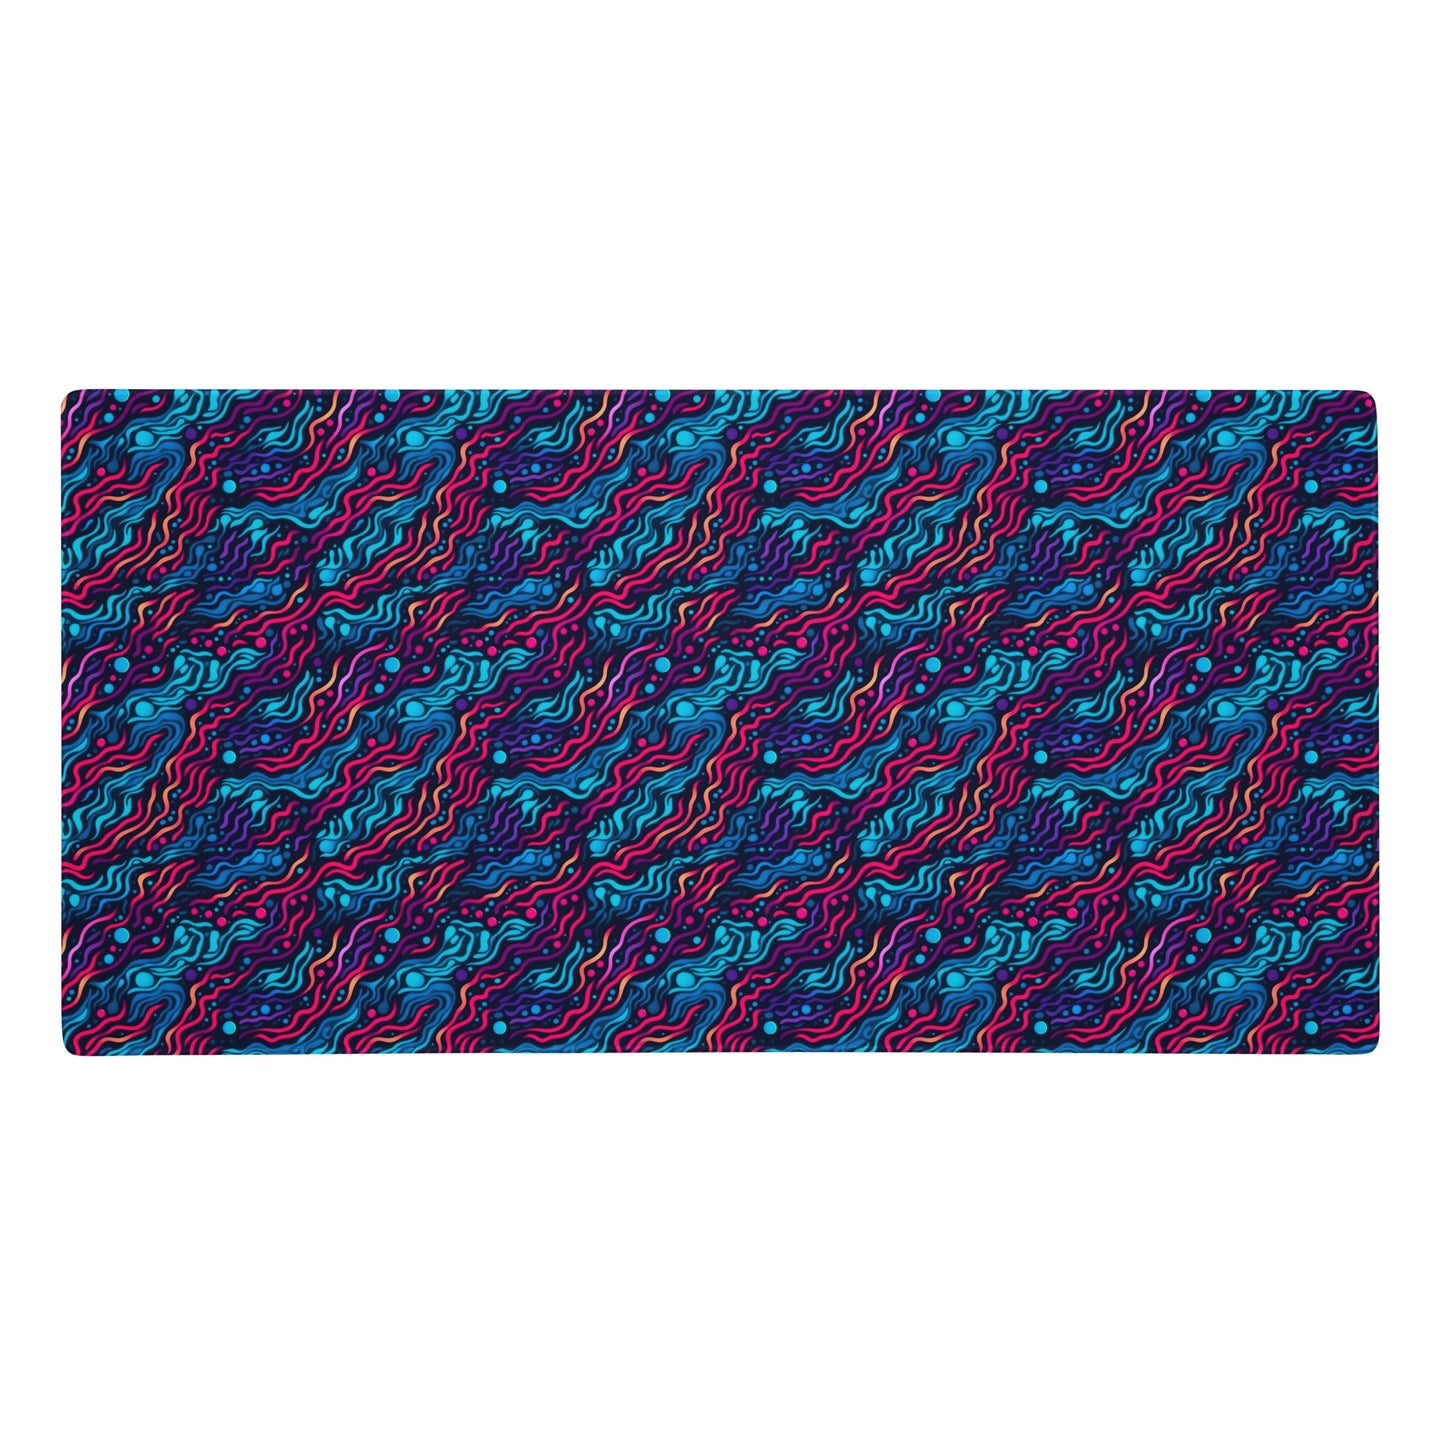 A 36" x 18" desk pad with wavy blue and pink pattern.